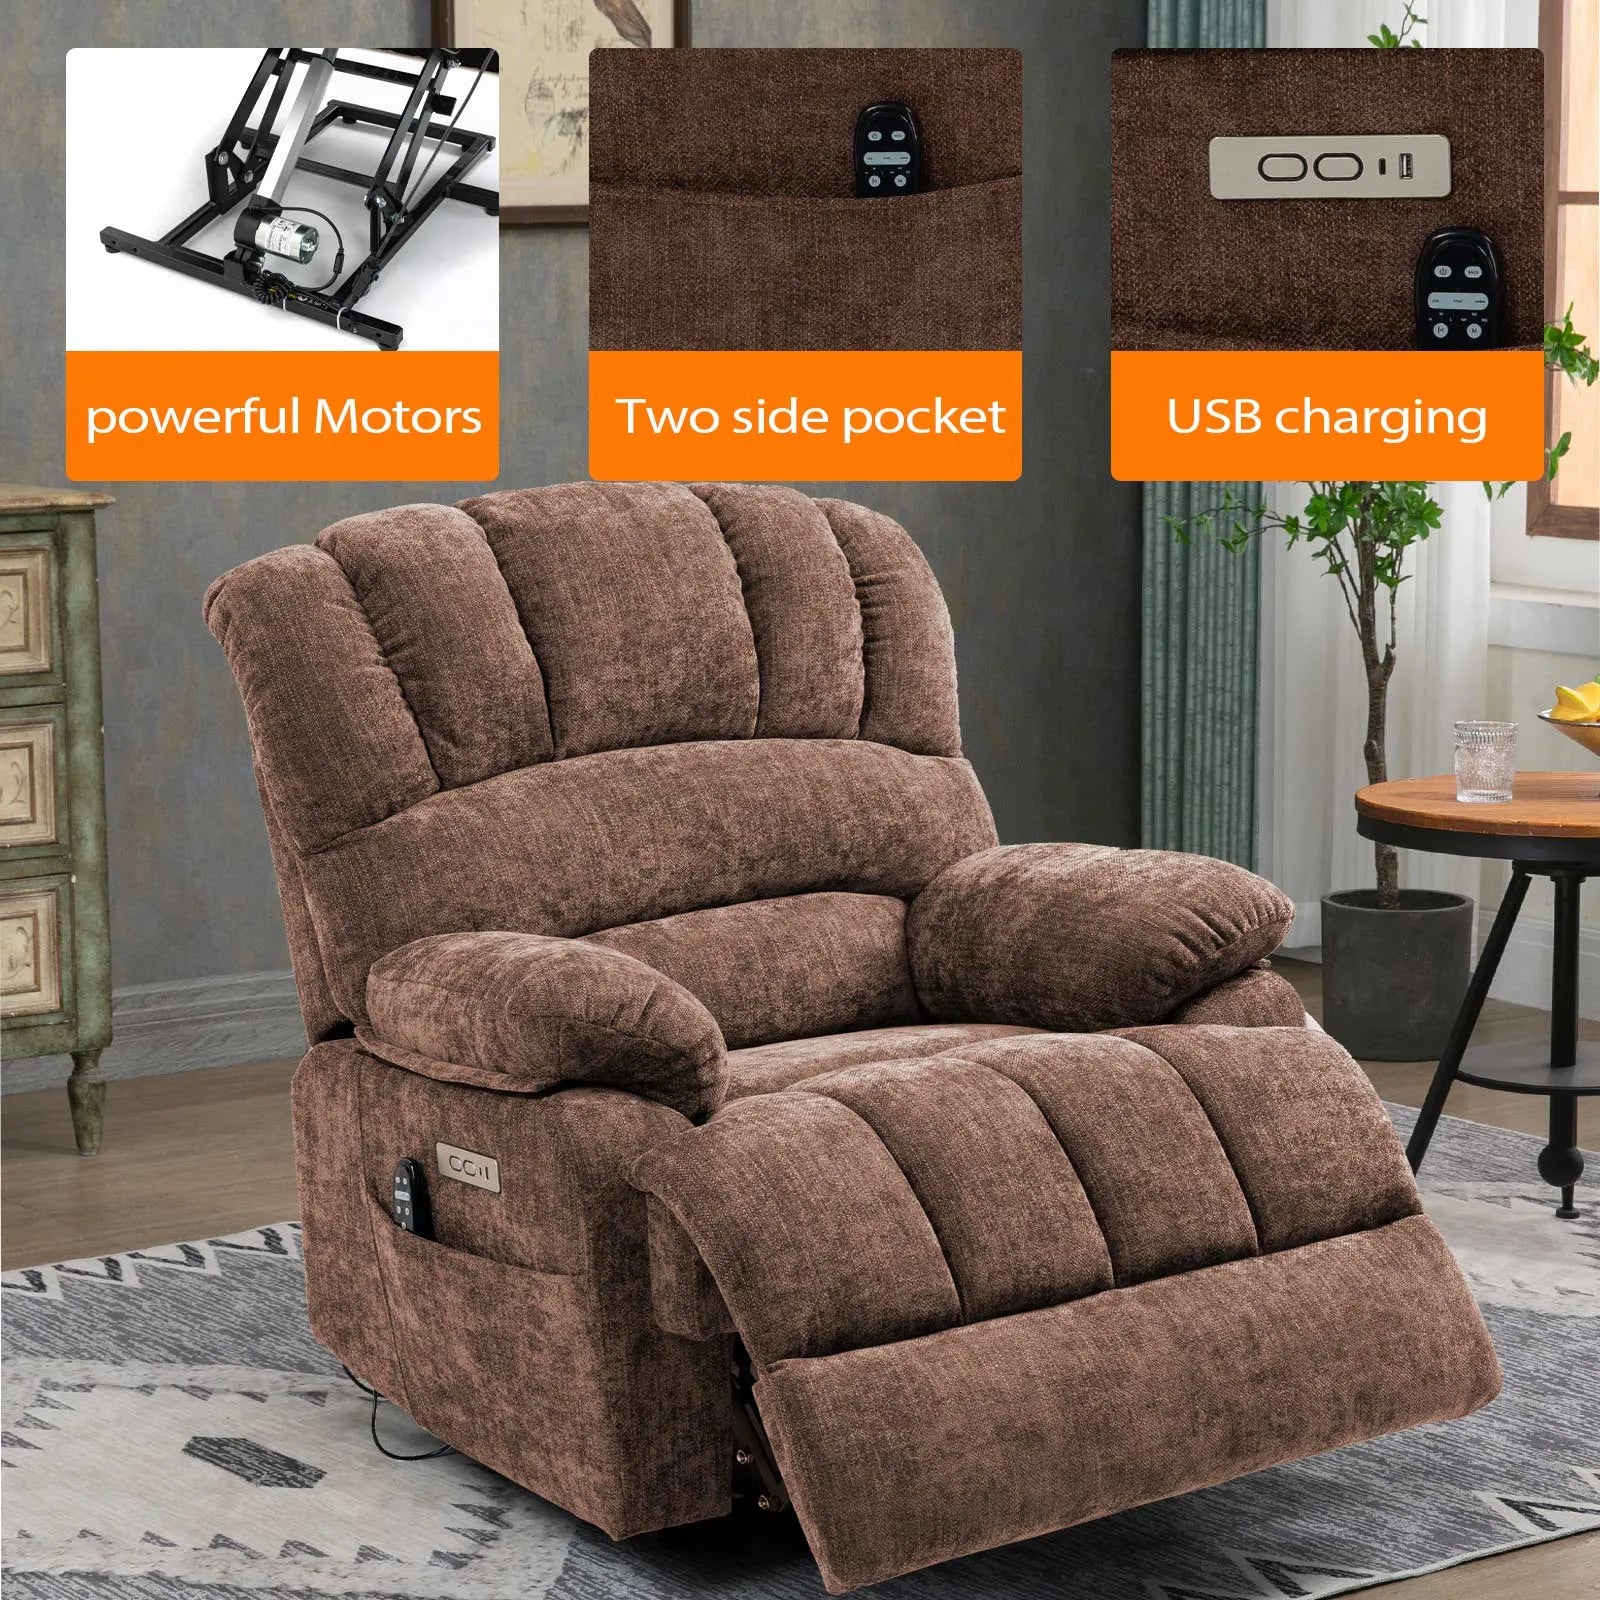 small lift recliner chair for short people